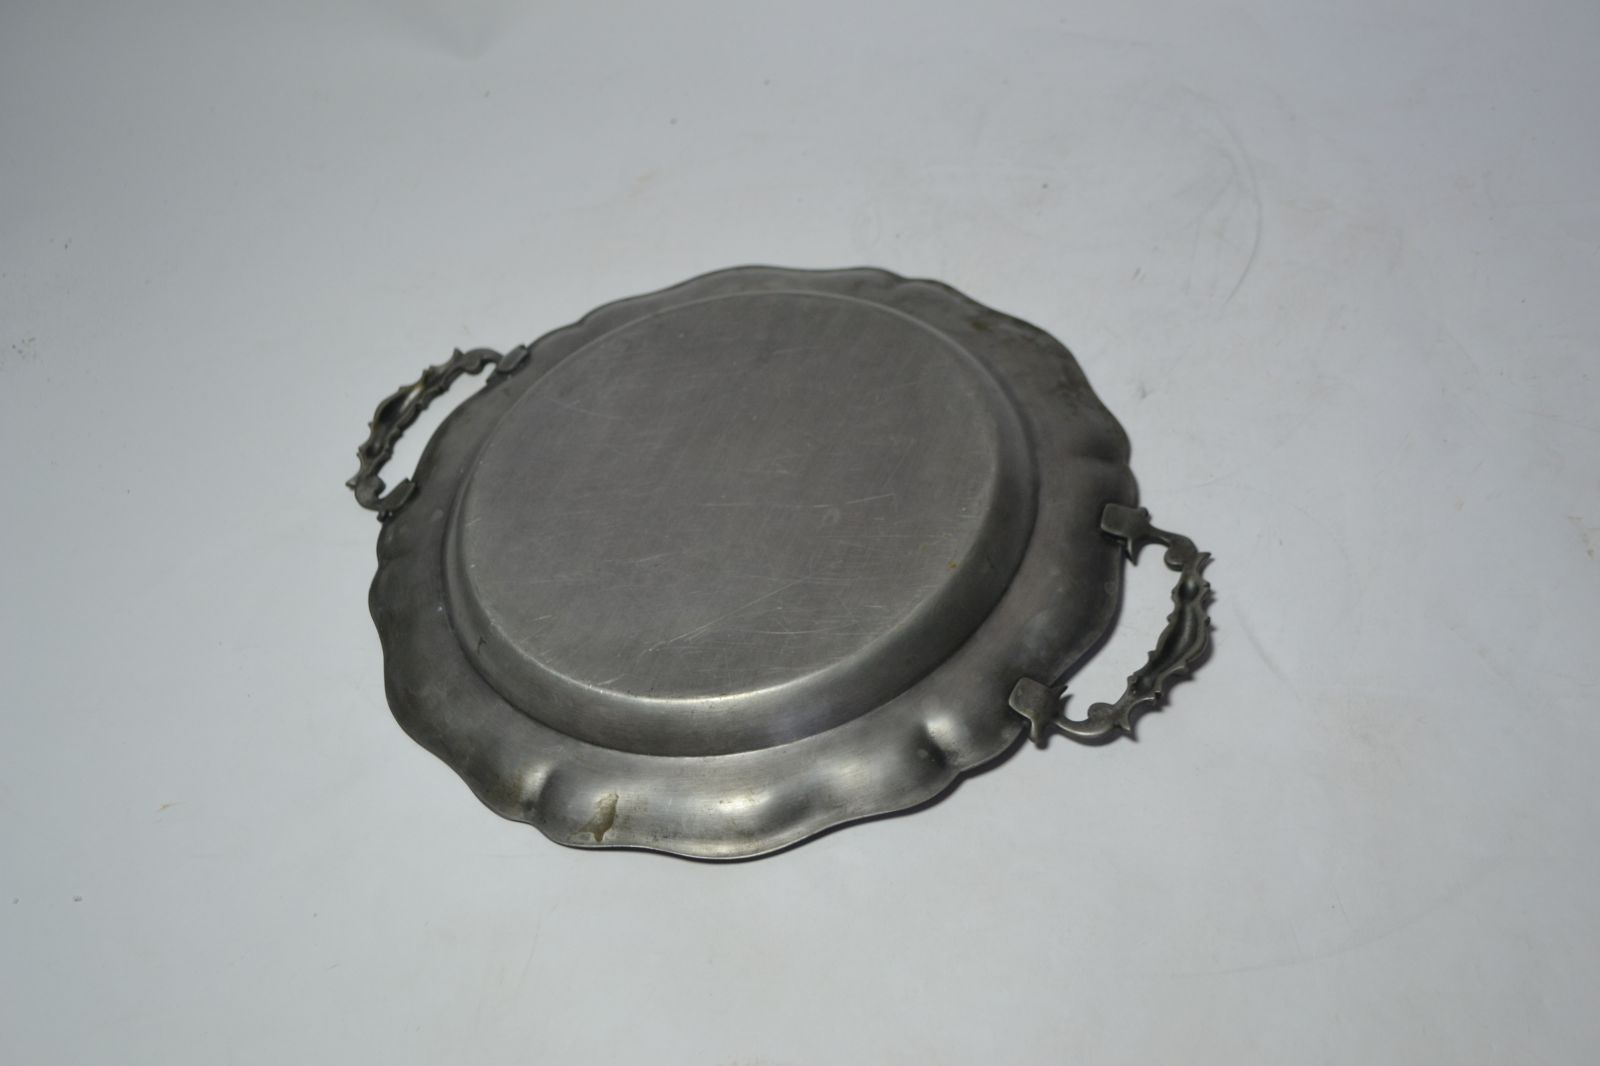 Twin handled pewter dish